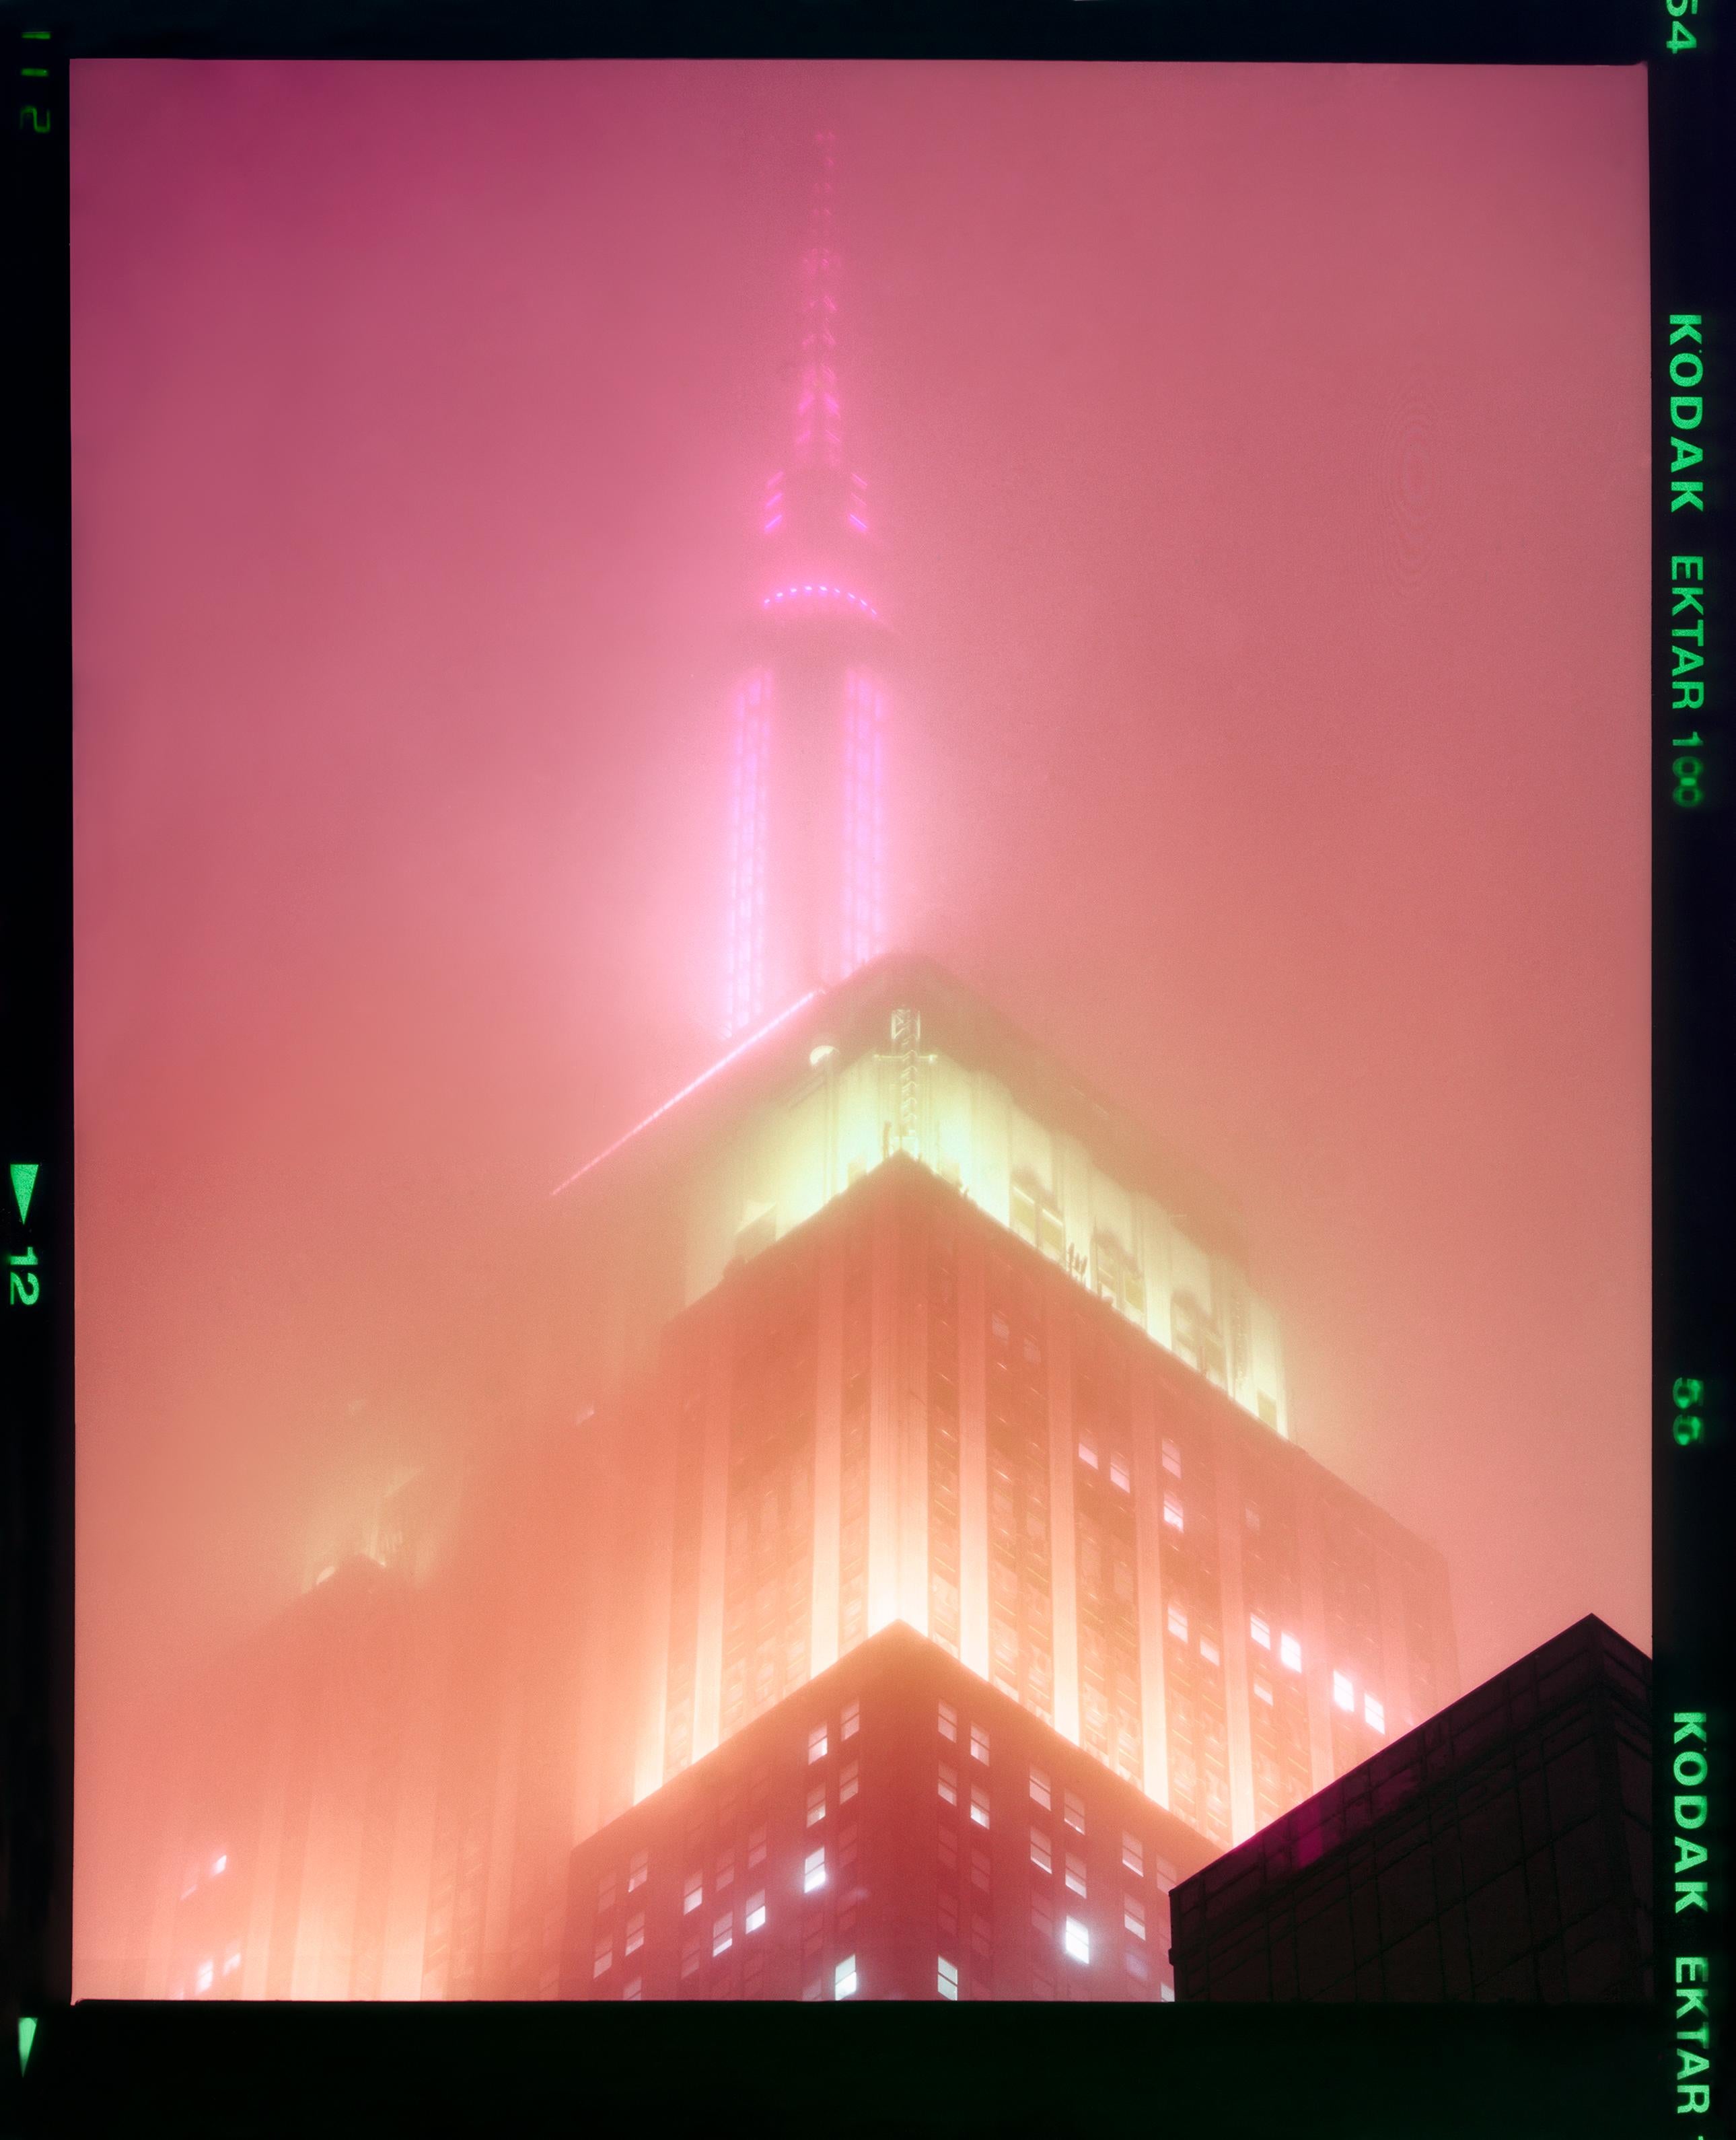 Richard Heeps Print - NOMAD III (Film Rebate), New York - Conceptual Architectural Color Photography